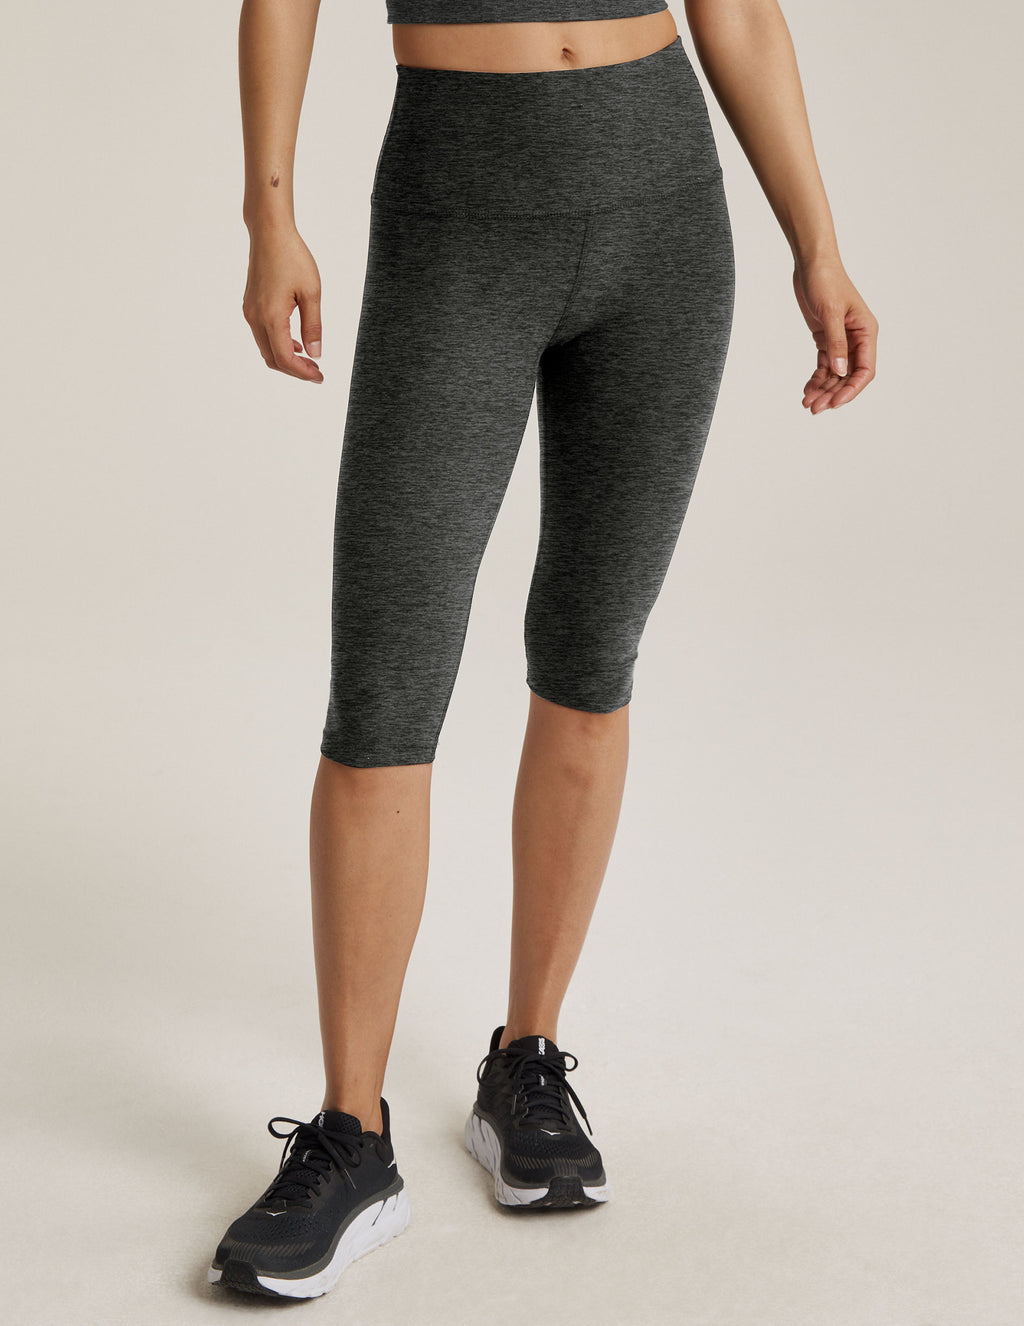 Spacedye Pedal Pusher High Waisted Legging Featured Image